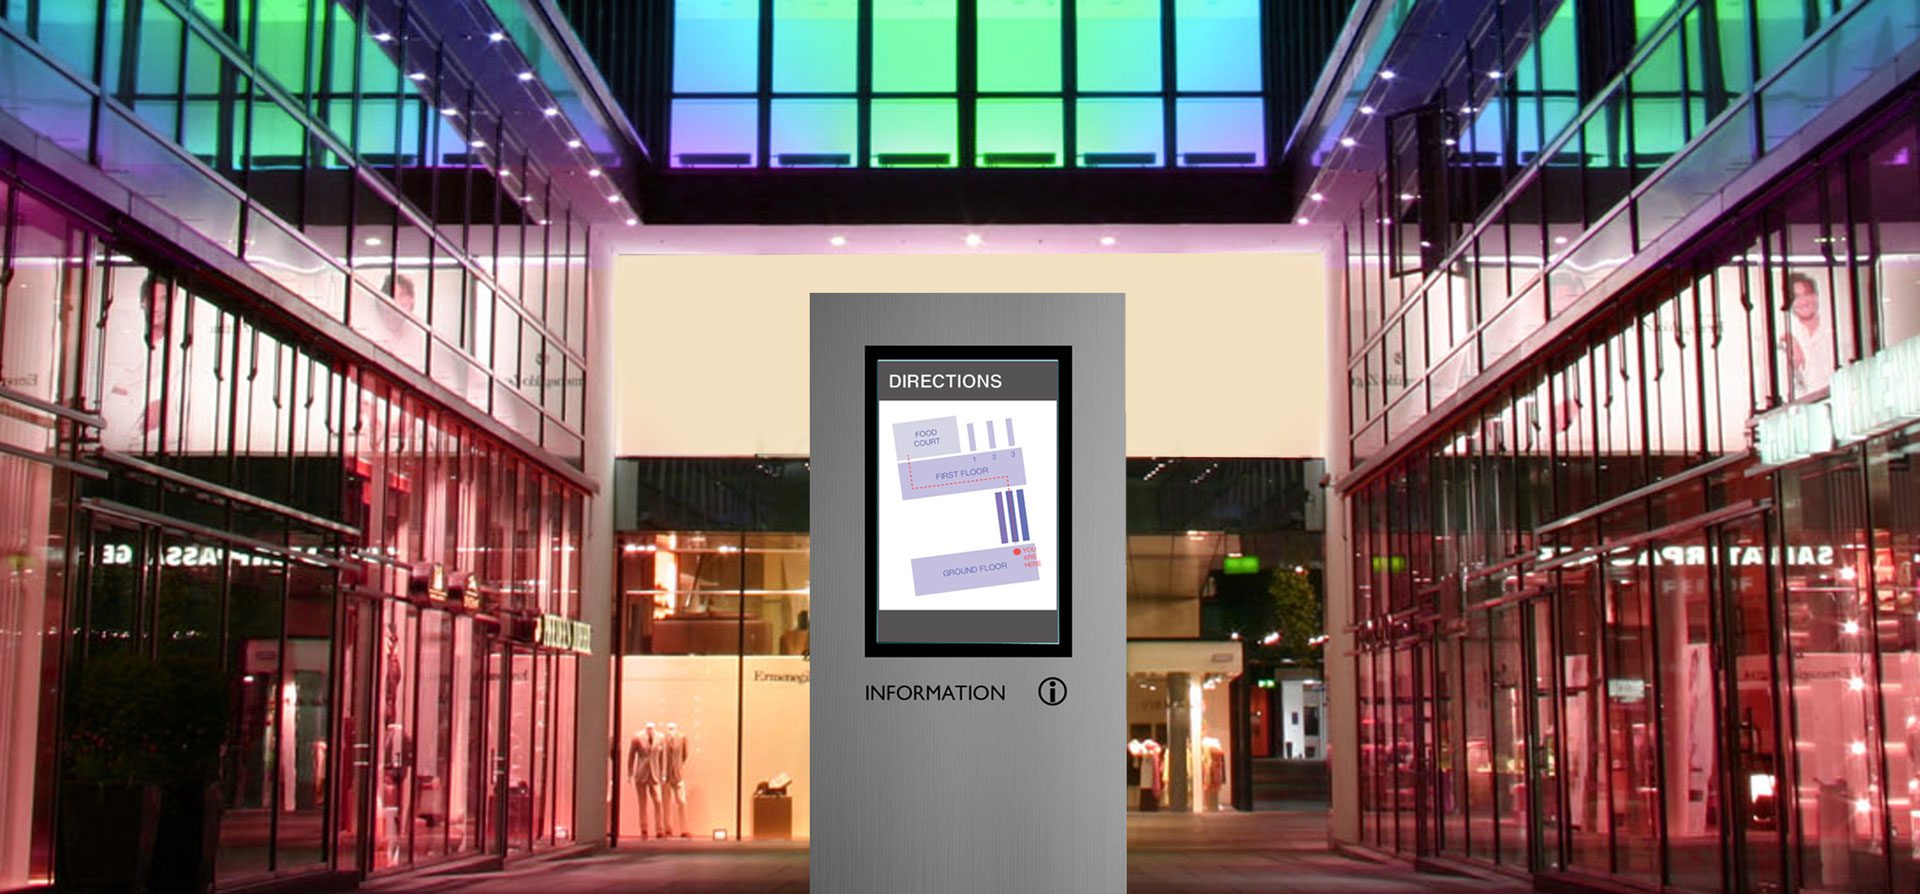 INDOOR AND OUTDOOR DIGITAL SIGNAGE FOR HOSPITALITY - METROSPEC